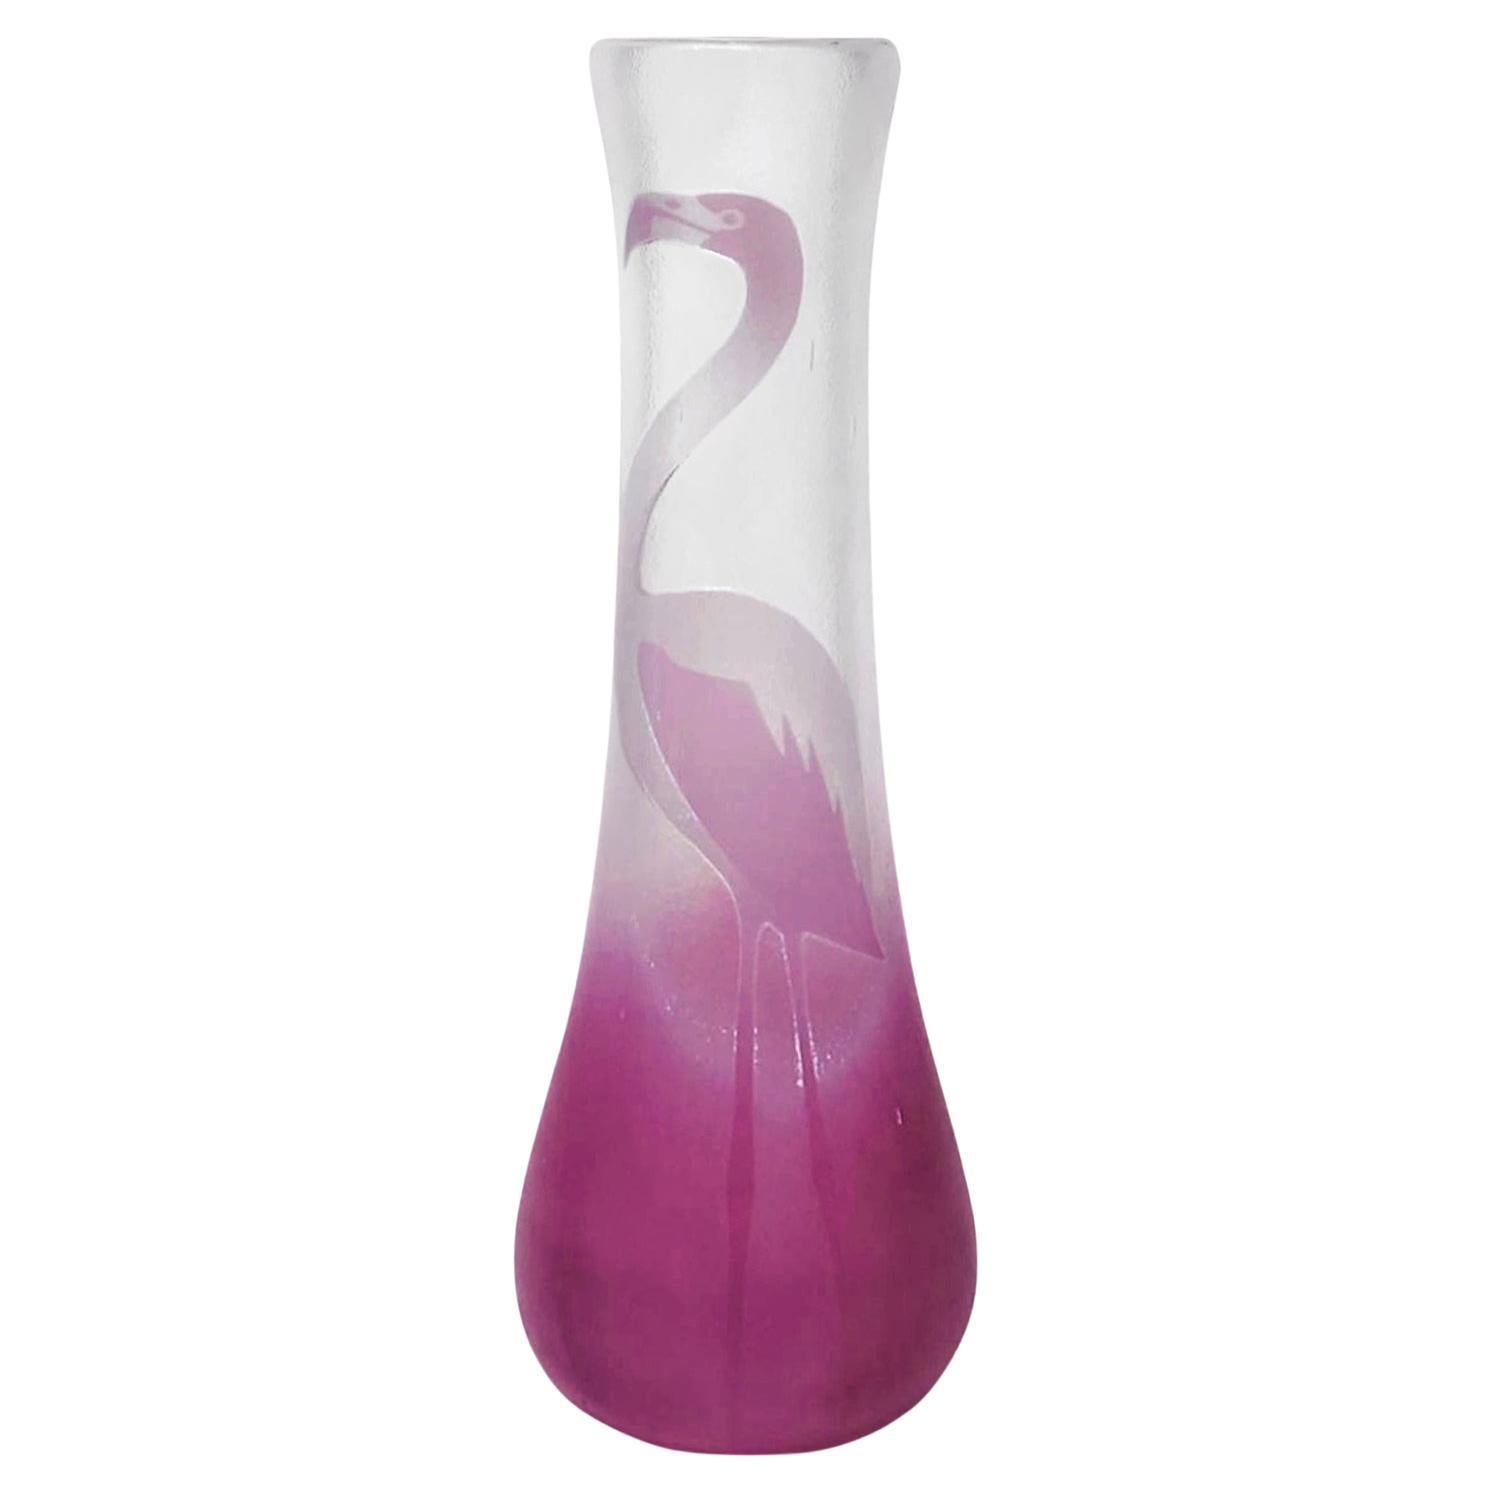 Paul Hoff Pink Flamingo Glass vase - FREE SHIPPING For Sale